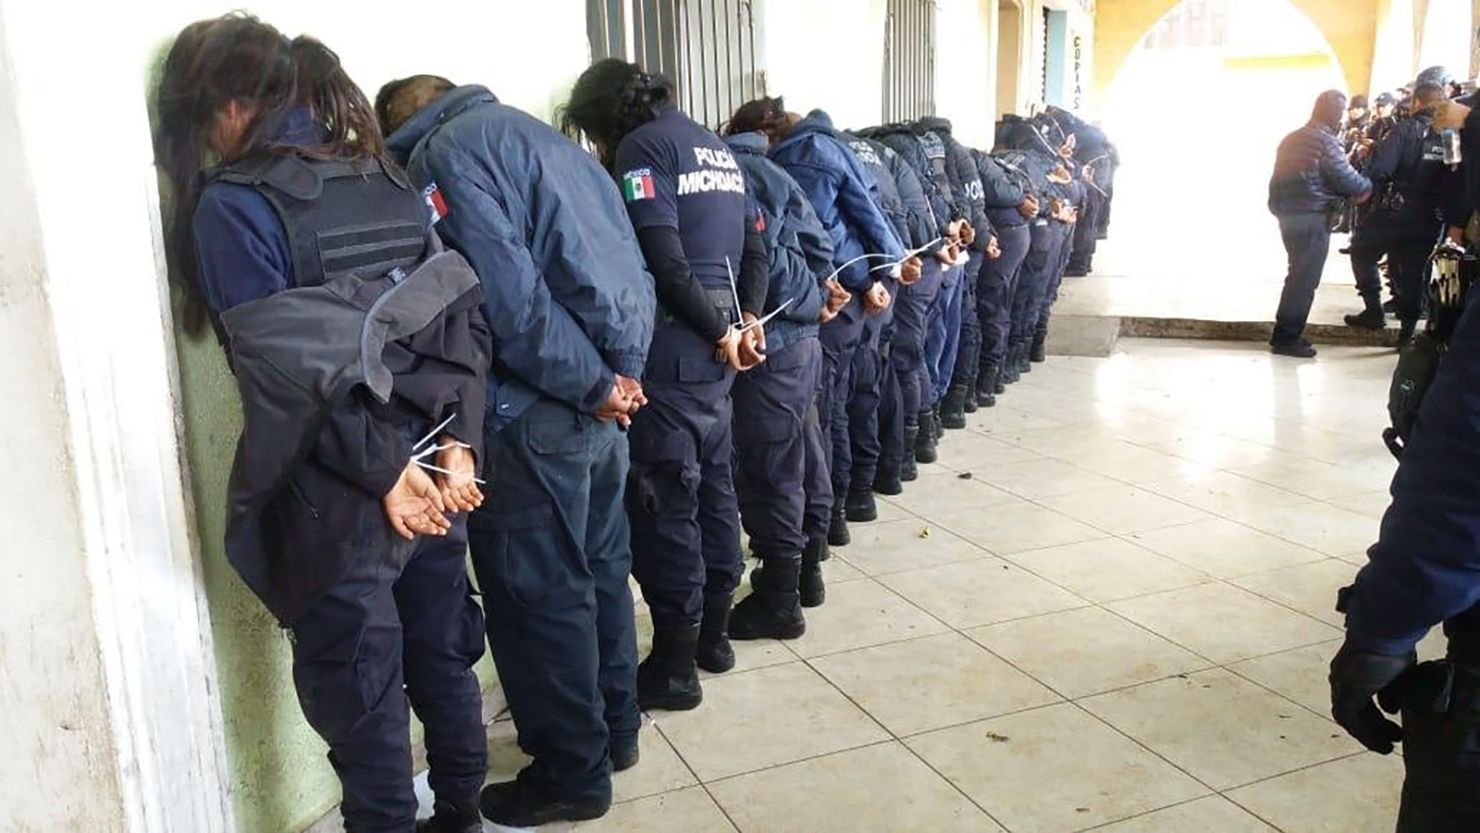 Michoacan State Police in Mexico said they detained municipal police of the city of Ocampo on Sunday.